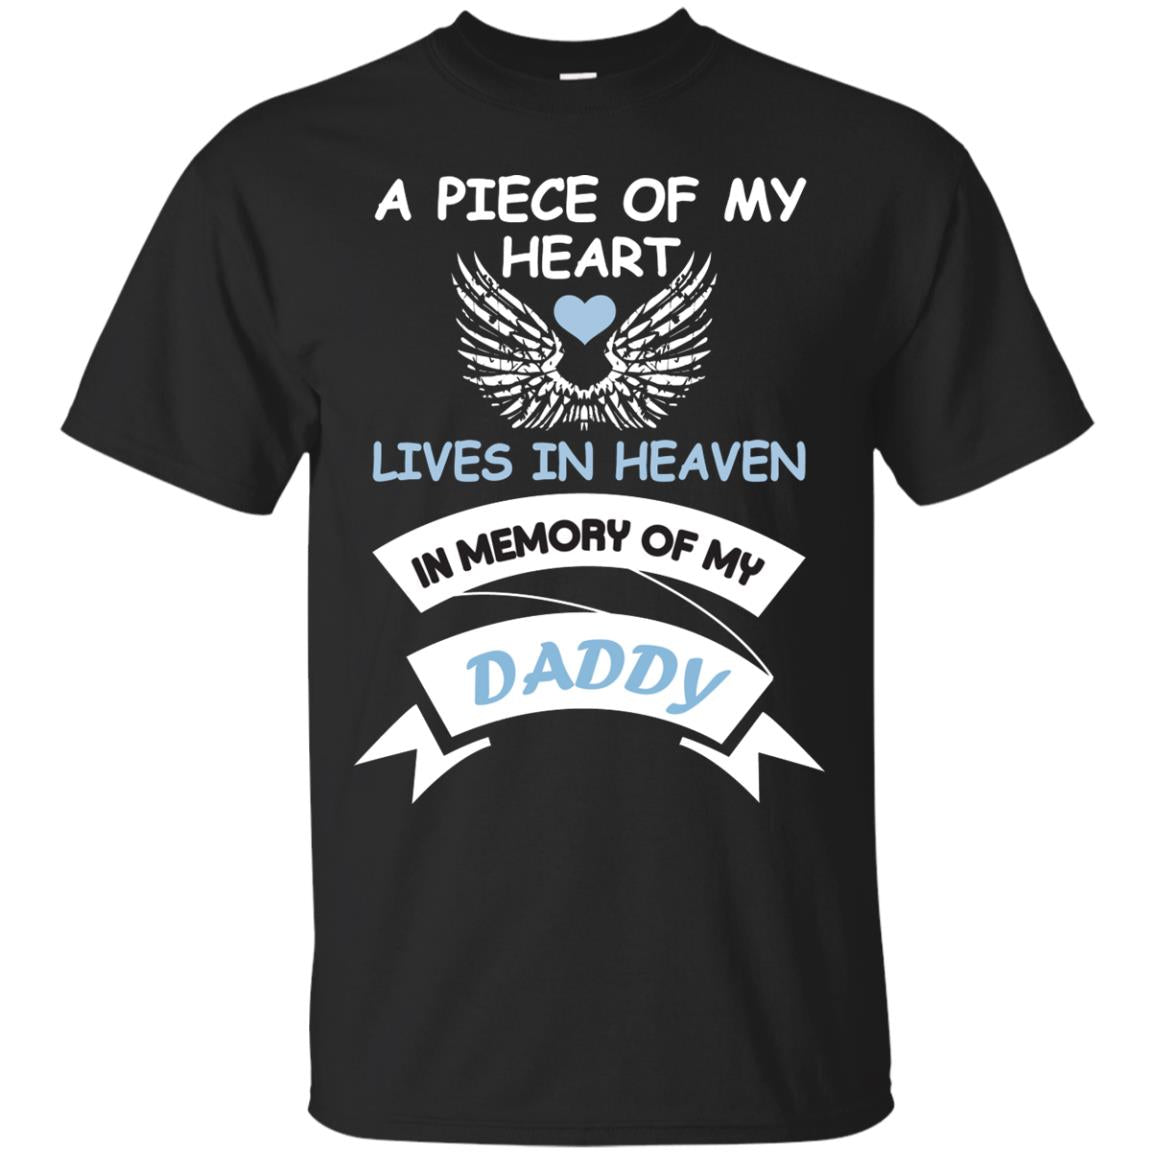 A Piece Of My Heart Lives In Heaven In Memory Of My Daddy ShirtG200 Gildan Ultra Cotton T-Shirt